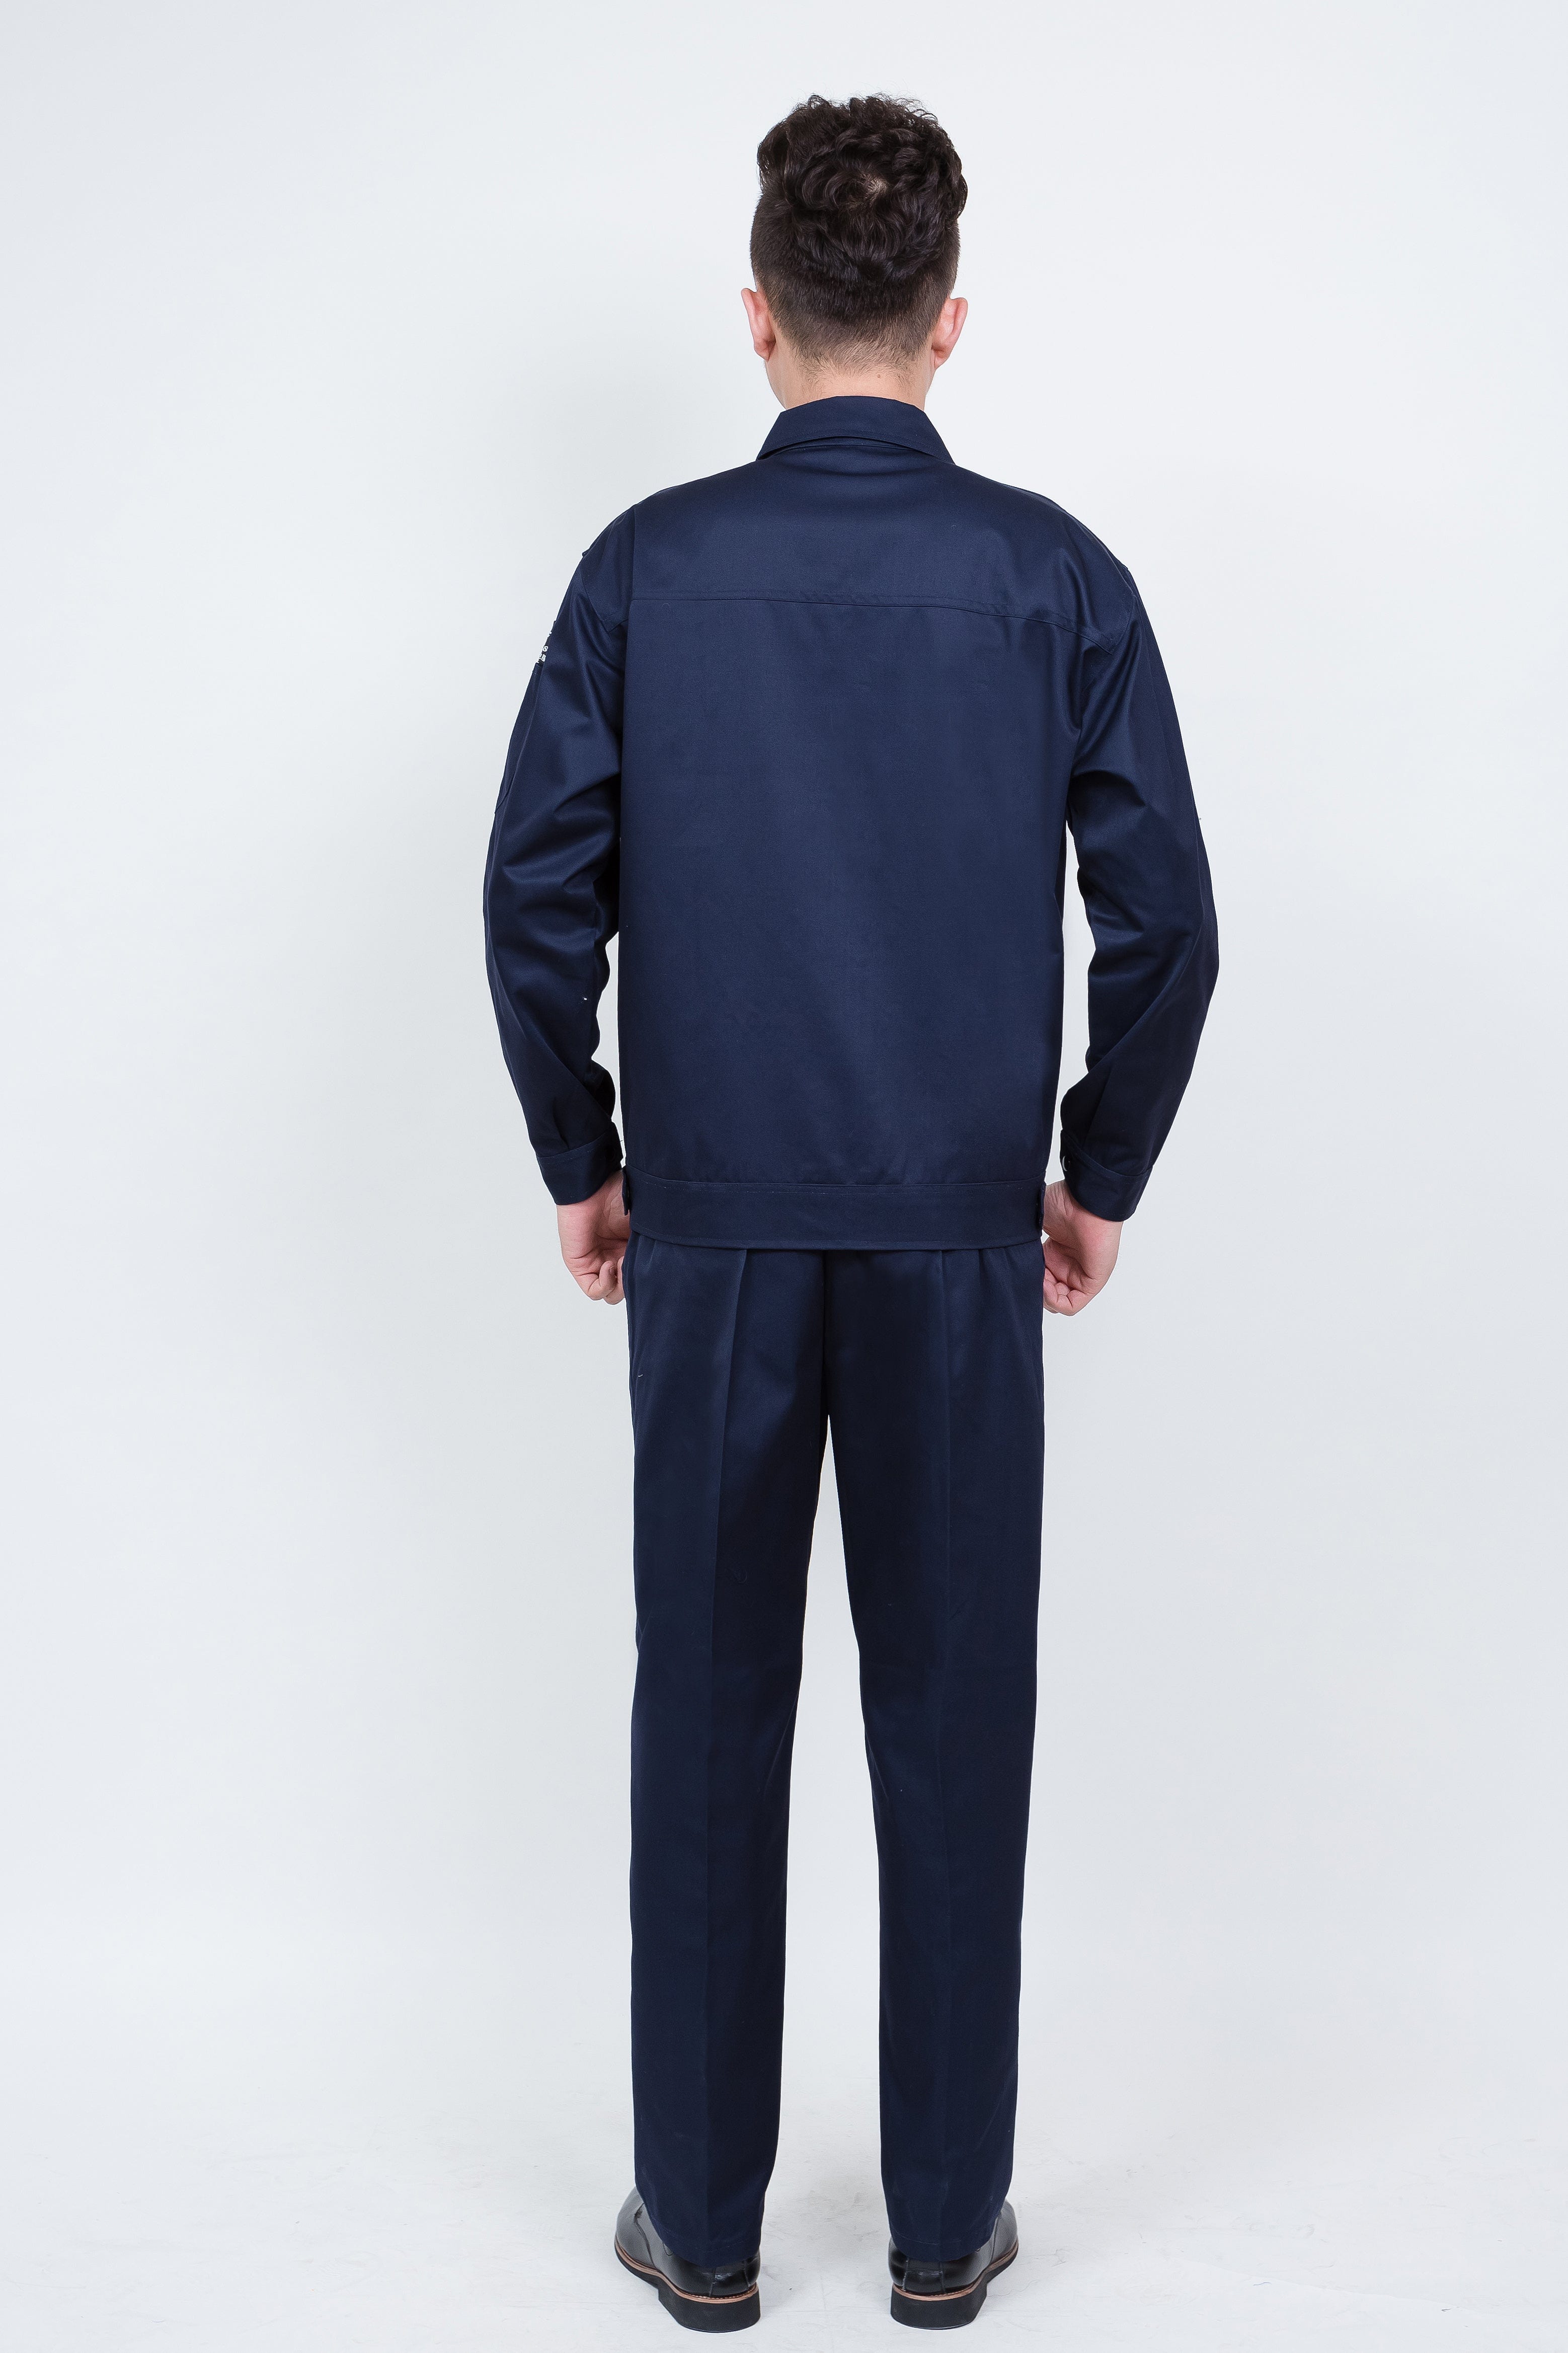 Corals Trading Co. 可樂思百貨商行 纯棉 Spring and Autumn style long-sleeved anti-static work clothes series SD-AS-W701